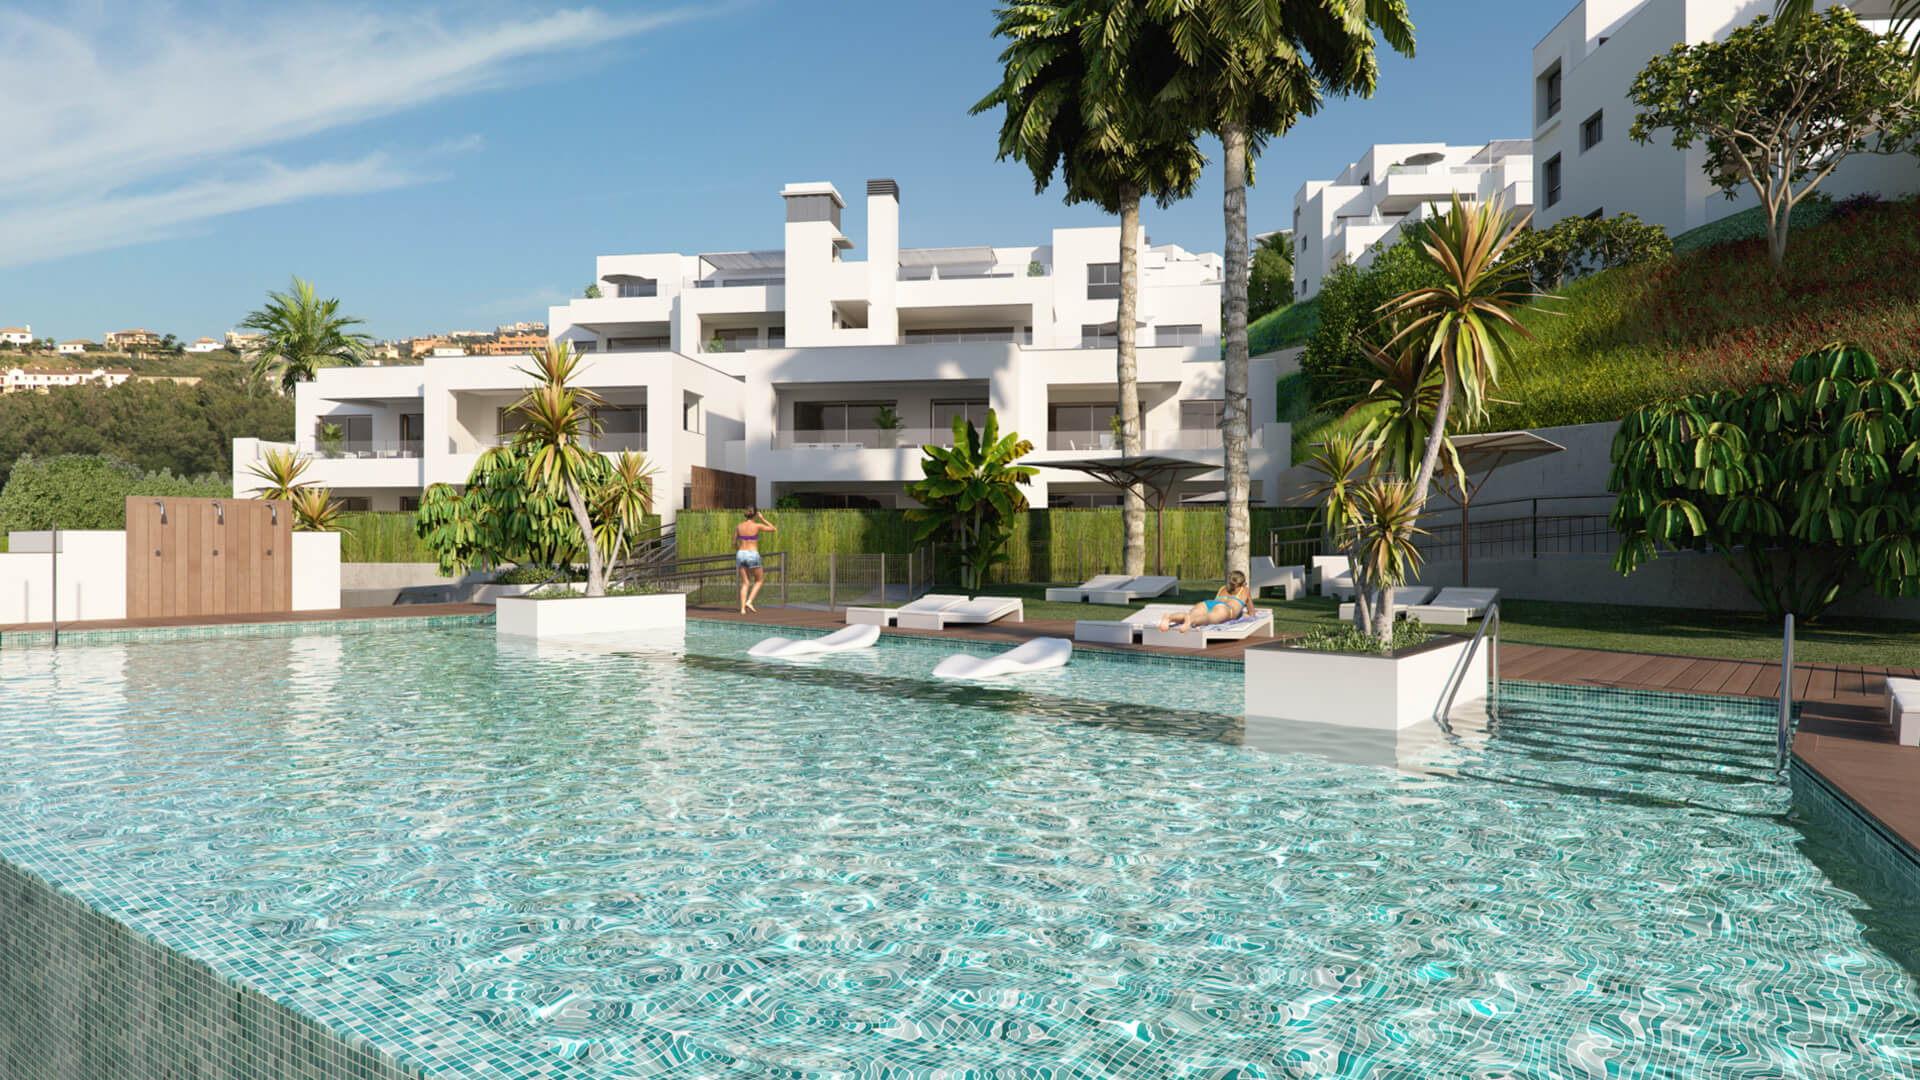 Arrecife - New Property For Sale in Casares